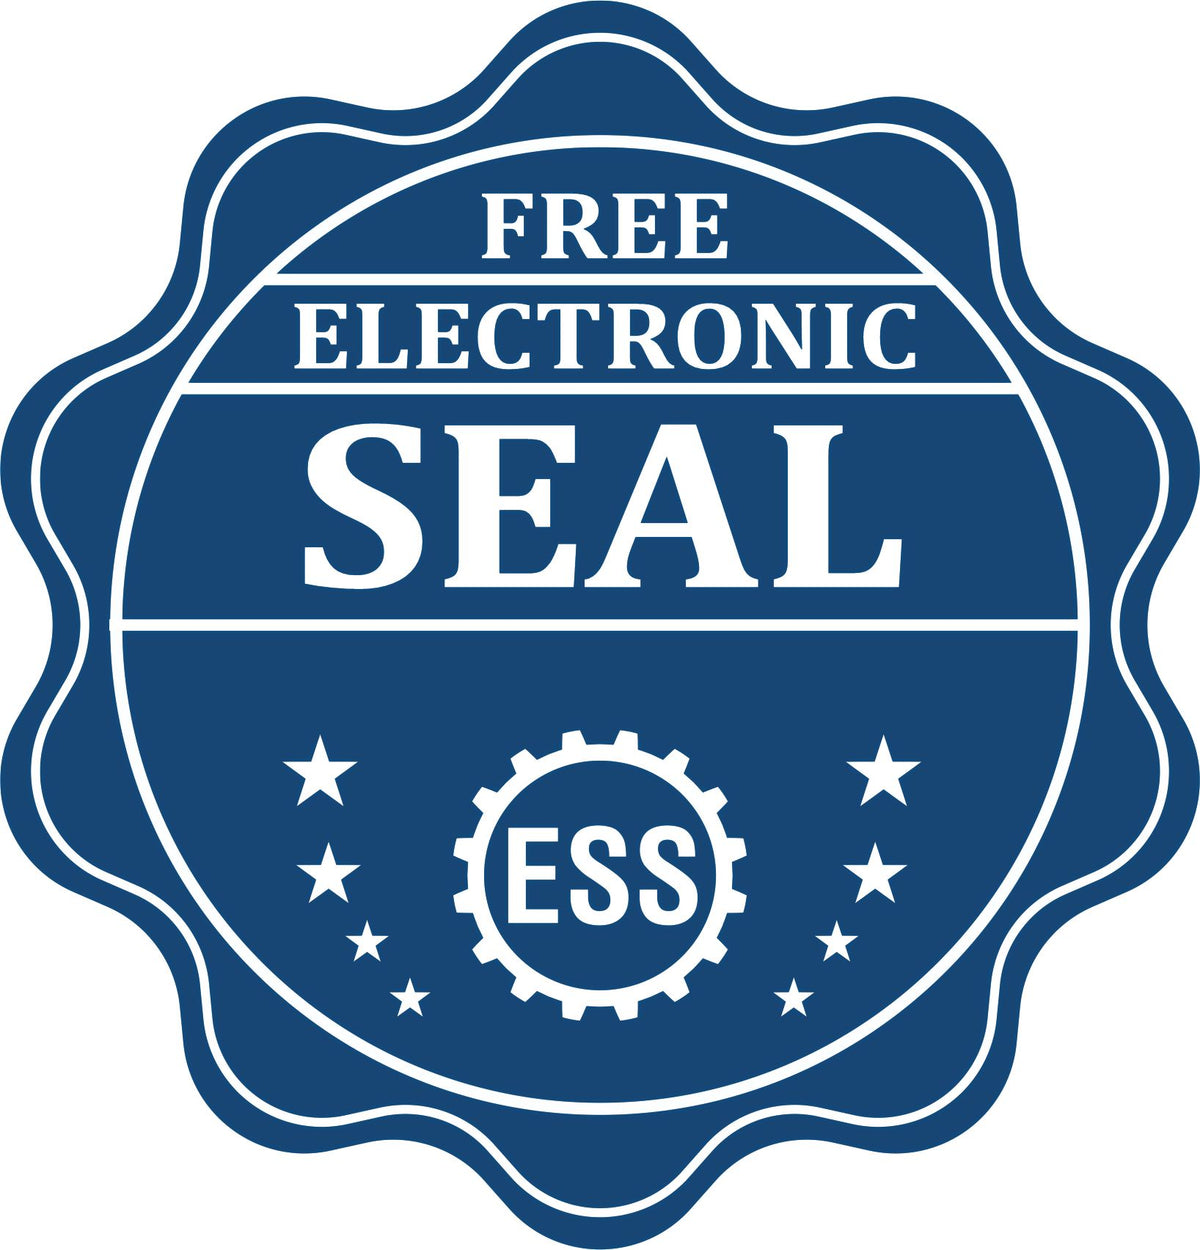 A badge showing a free electronic seal for the Self-Inking Guam Landscape Architect Stamp with stars and the ESS gear on the emblem.